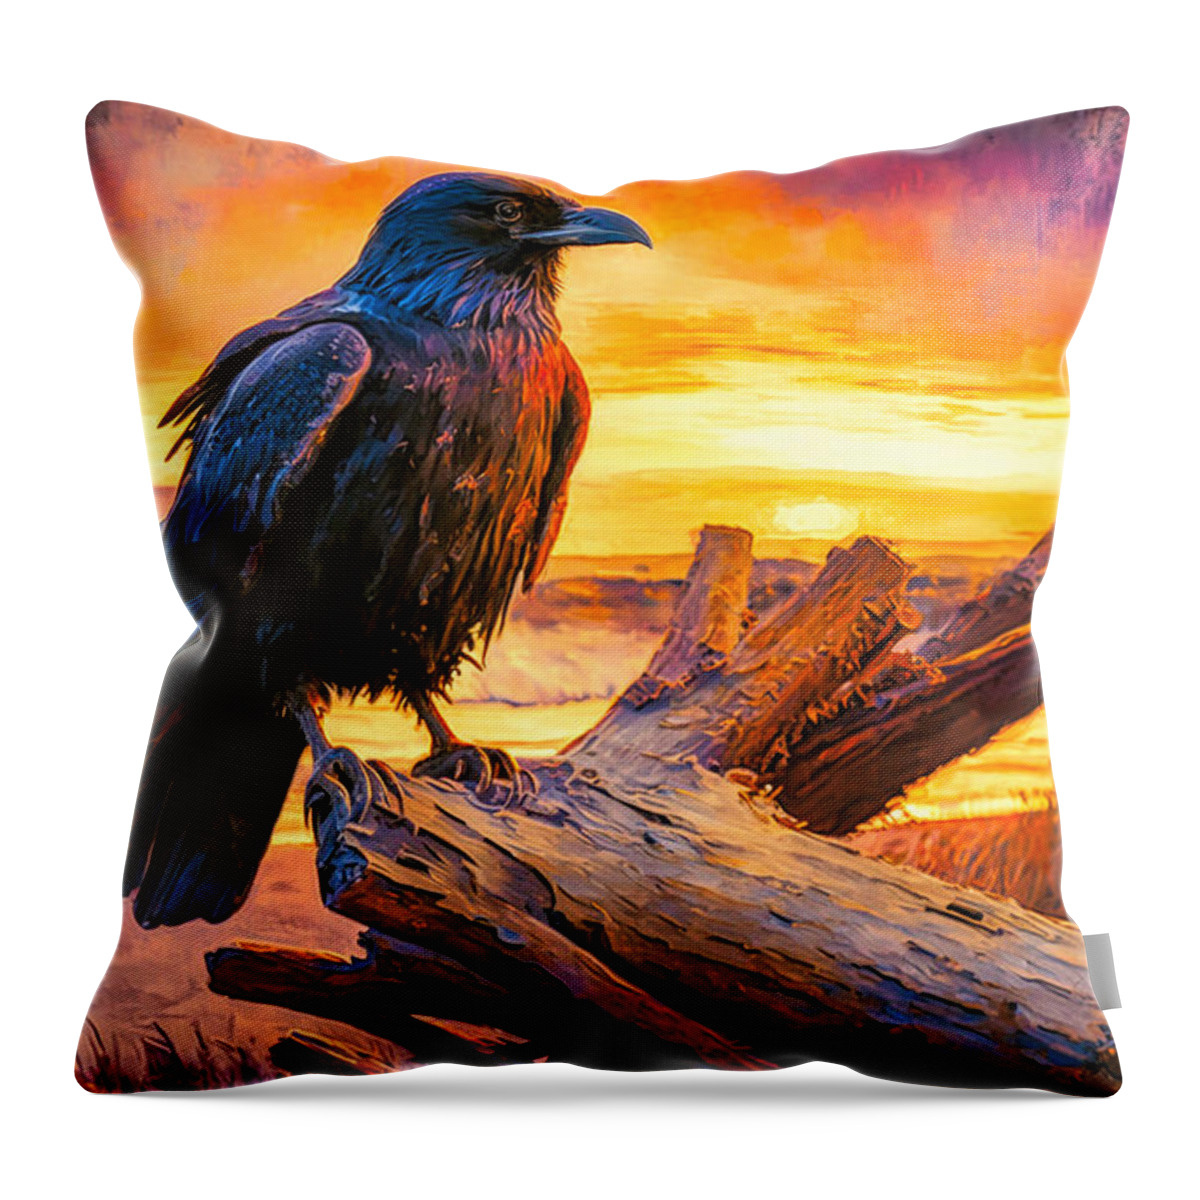 Abstract Throw Pillow featuring the digital art Raven on Driftwood by Craig Boehman